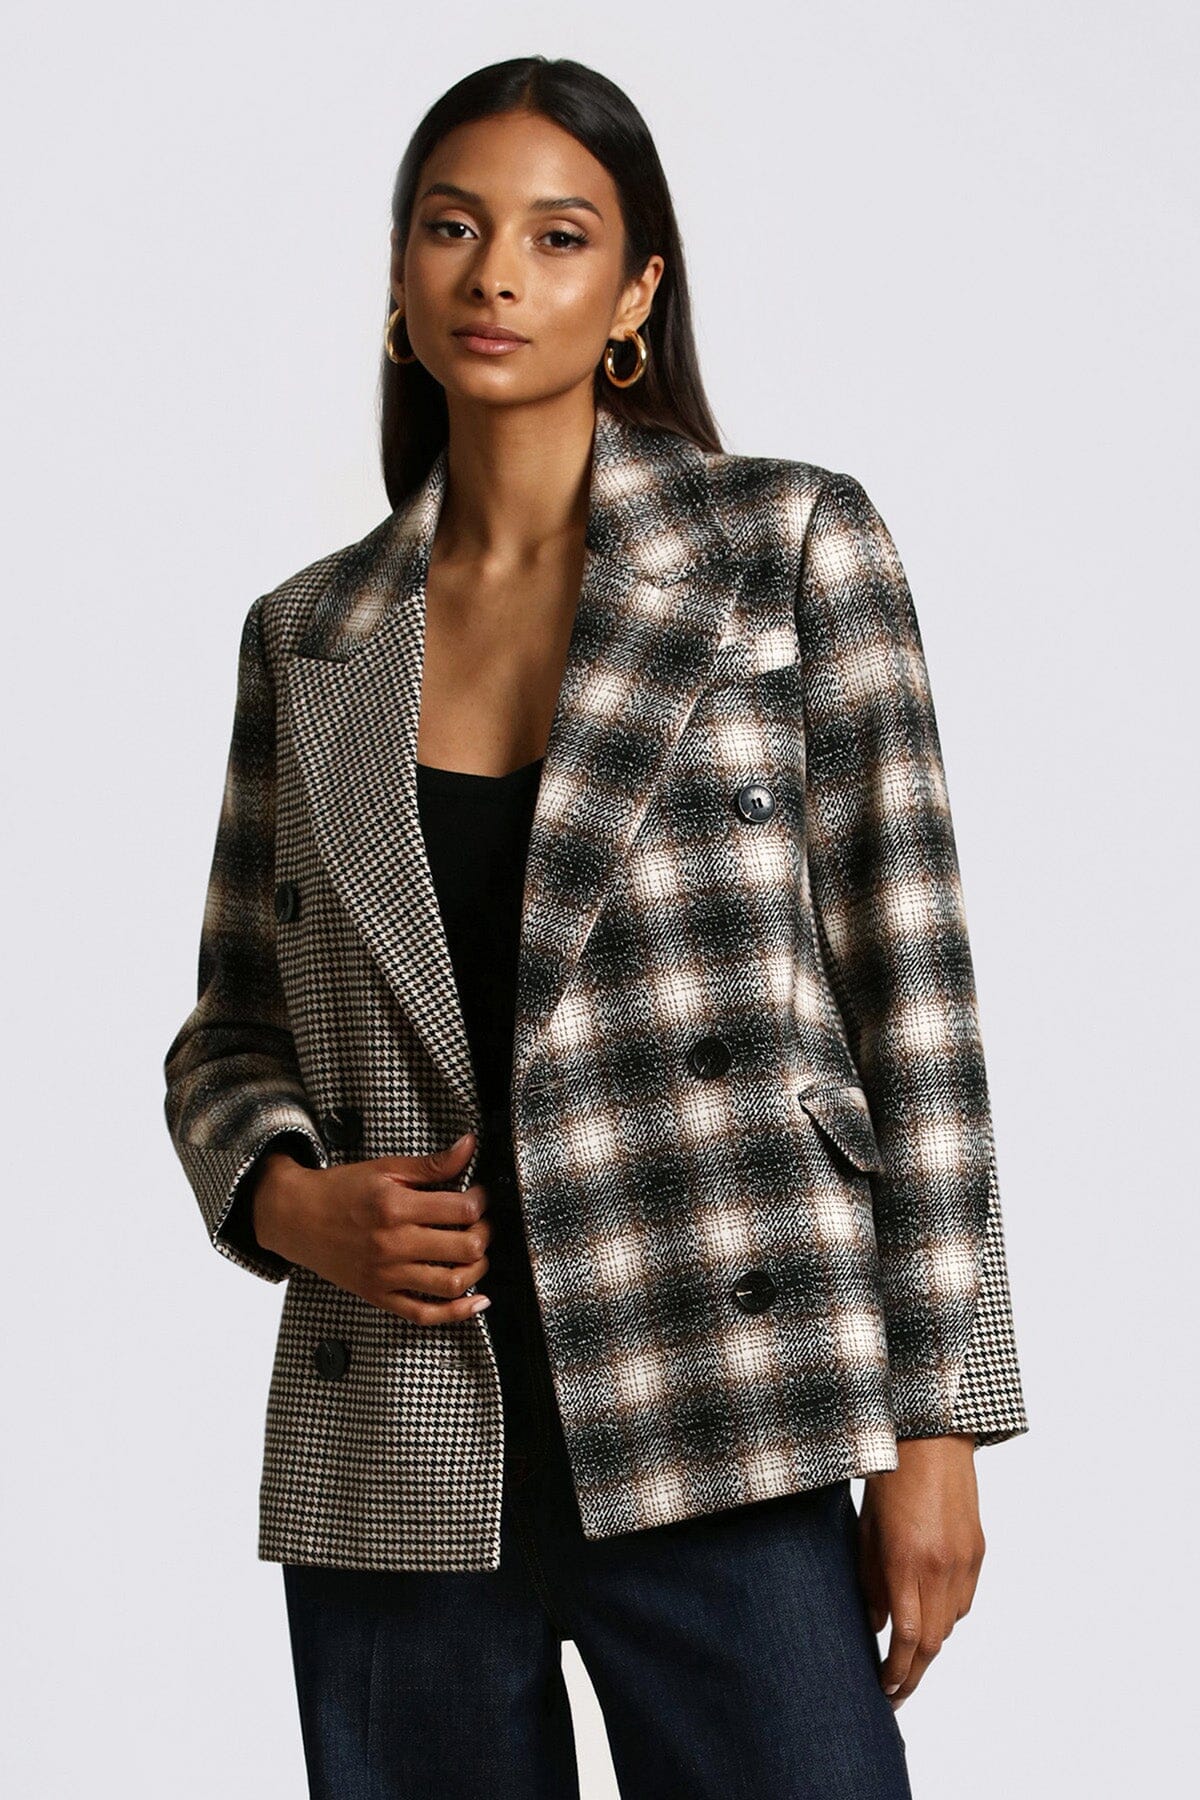 Black white brown mixed pattern double breasted blazer jacket coat - women's figure flattering fashion jackets blazers for fall 2023